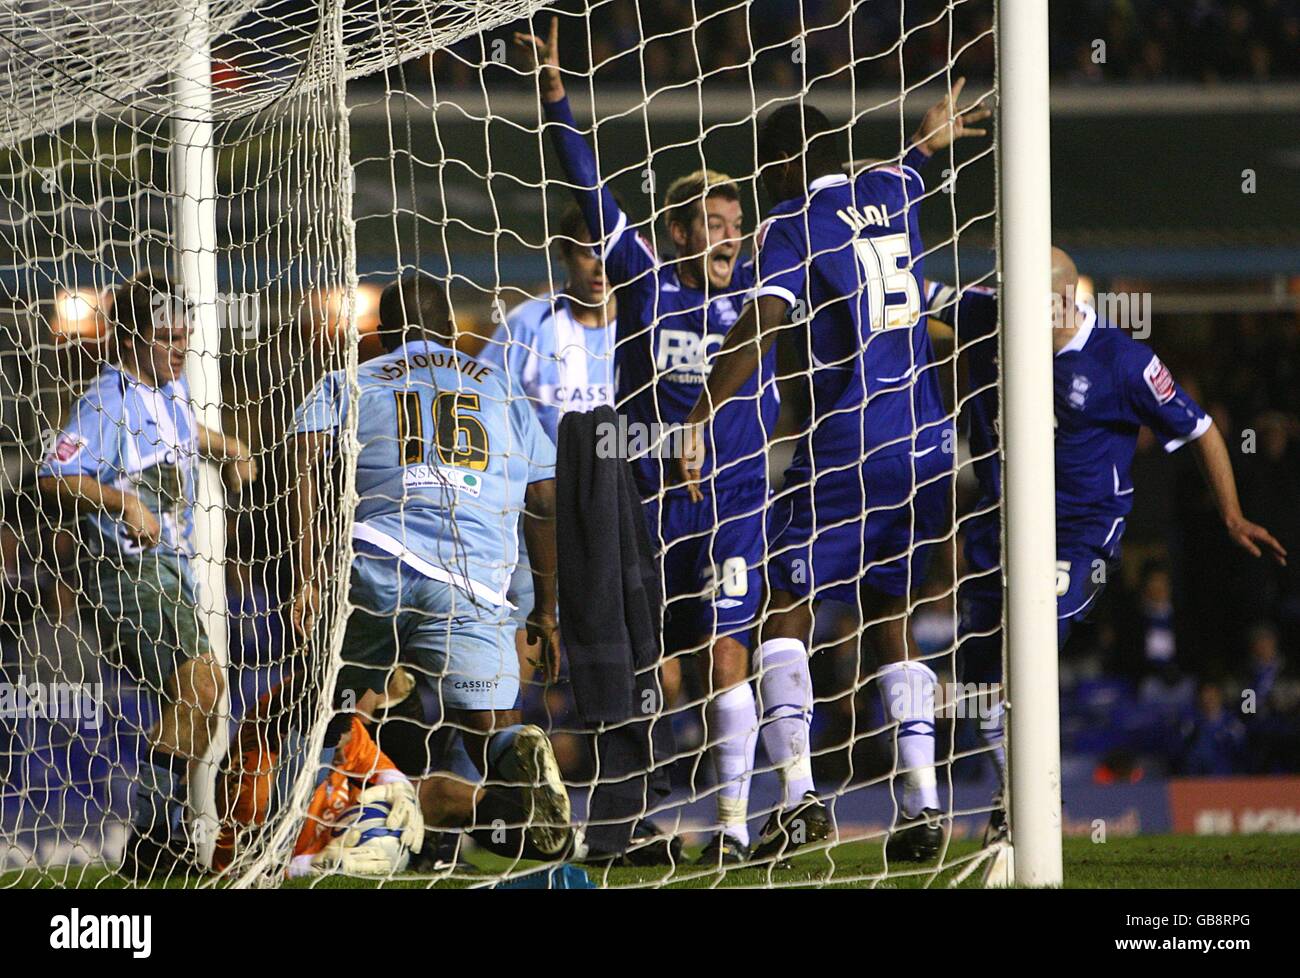 Soccer - Coca-Cola Football League Championship - Birmingham City v Coventry City - St. Andrews' Stadium. Birmingham City players appeal that the ball has crossed the line and that a goal should be awarded Stock Photo